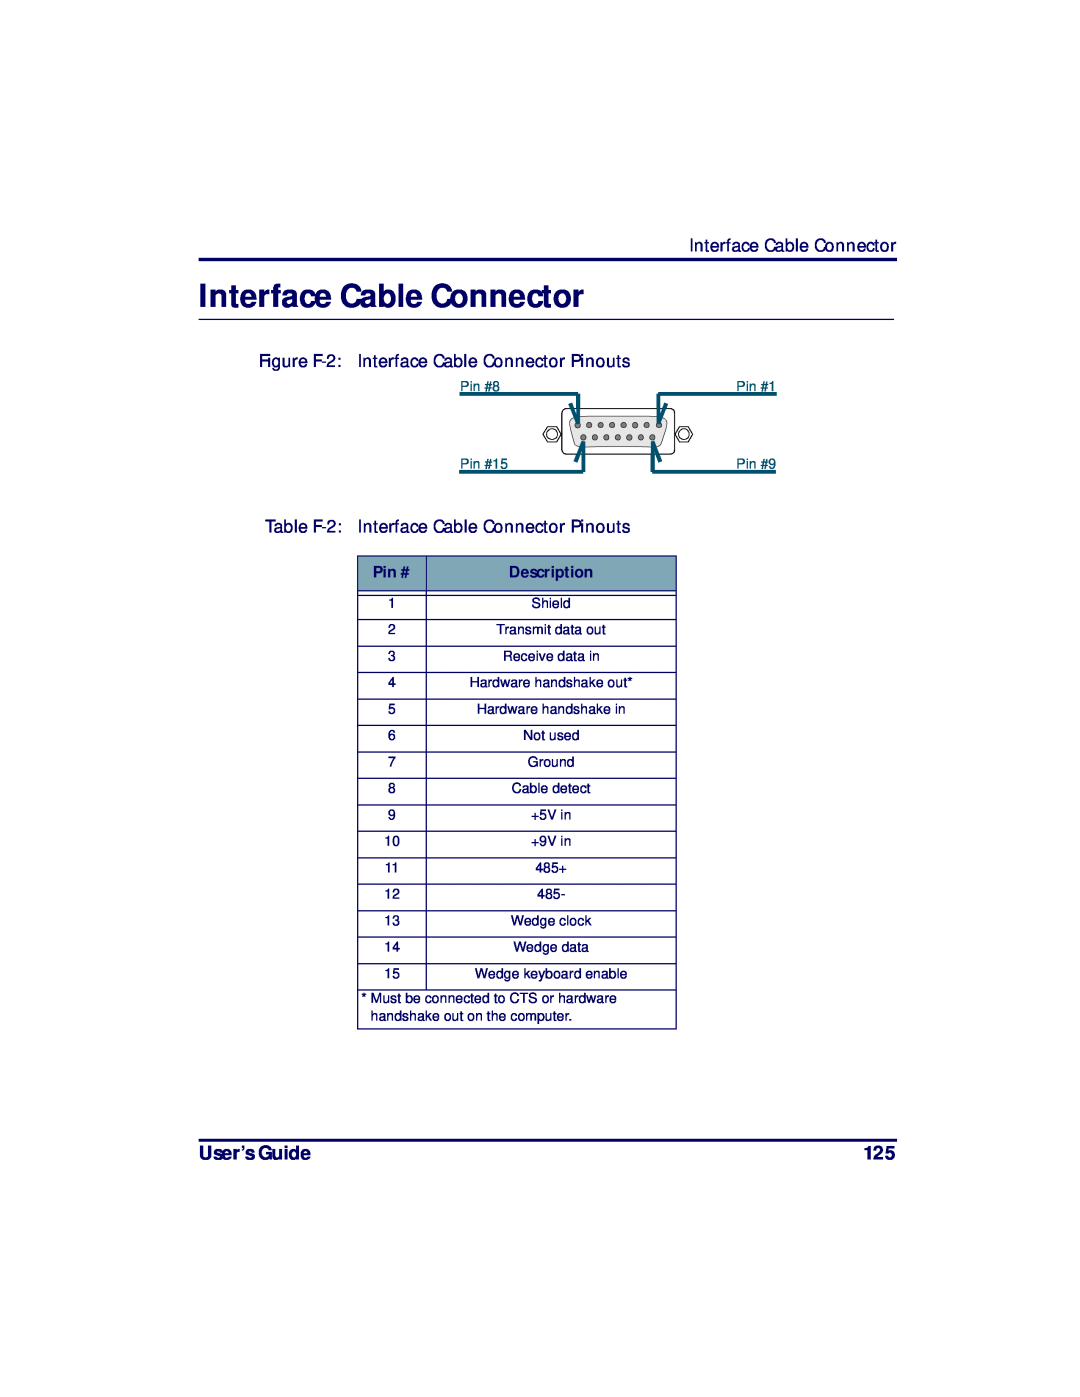 PSC PT2000 User’s Guide, Figure F-2 Interface Cable Connector Pinouts, Table F-2 Interface Cable Connector Pinouts 